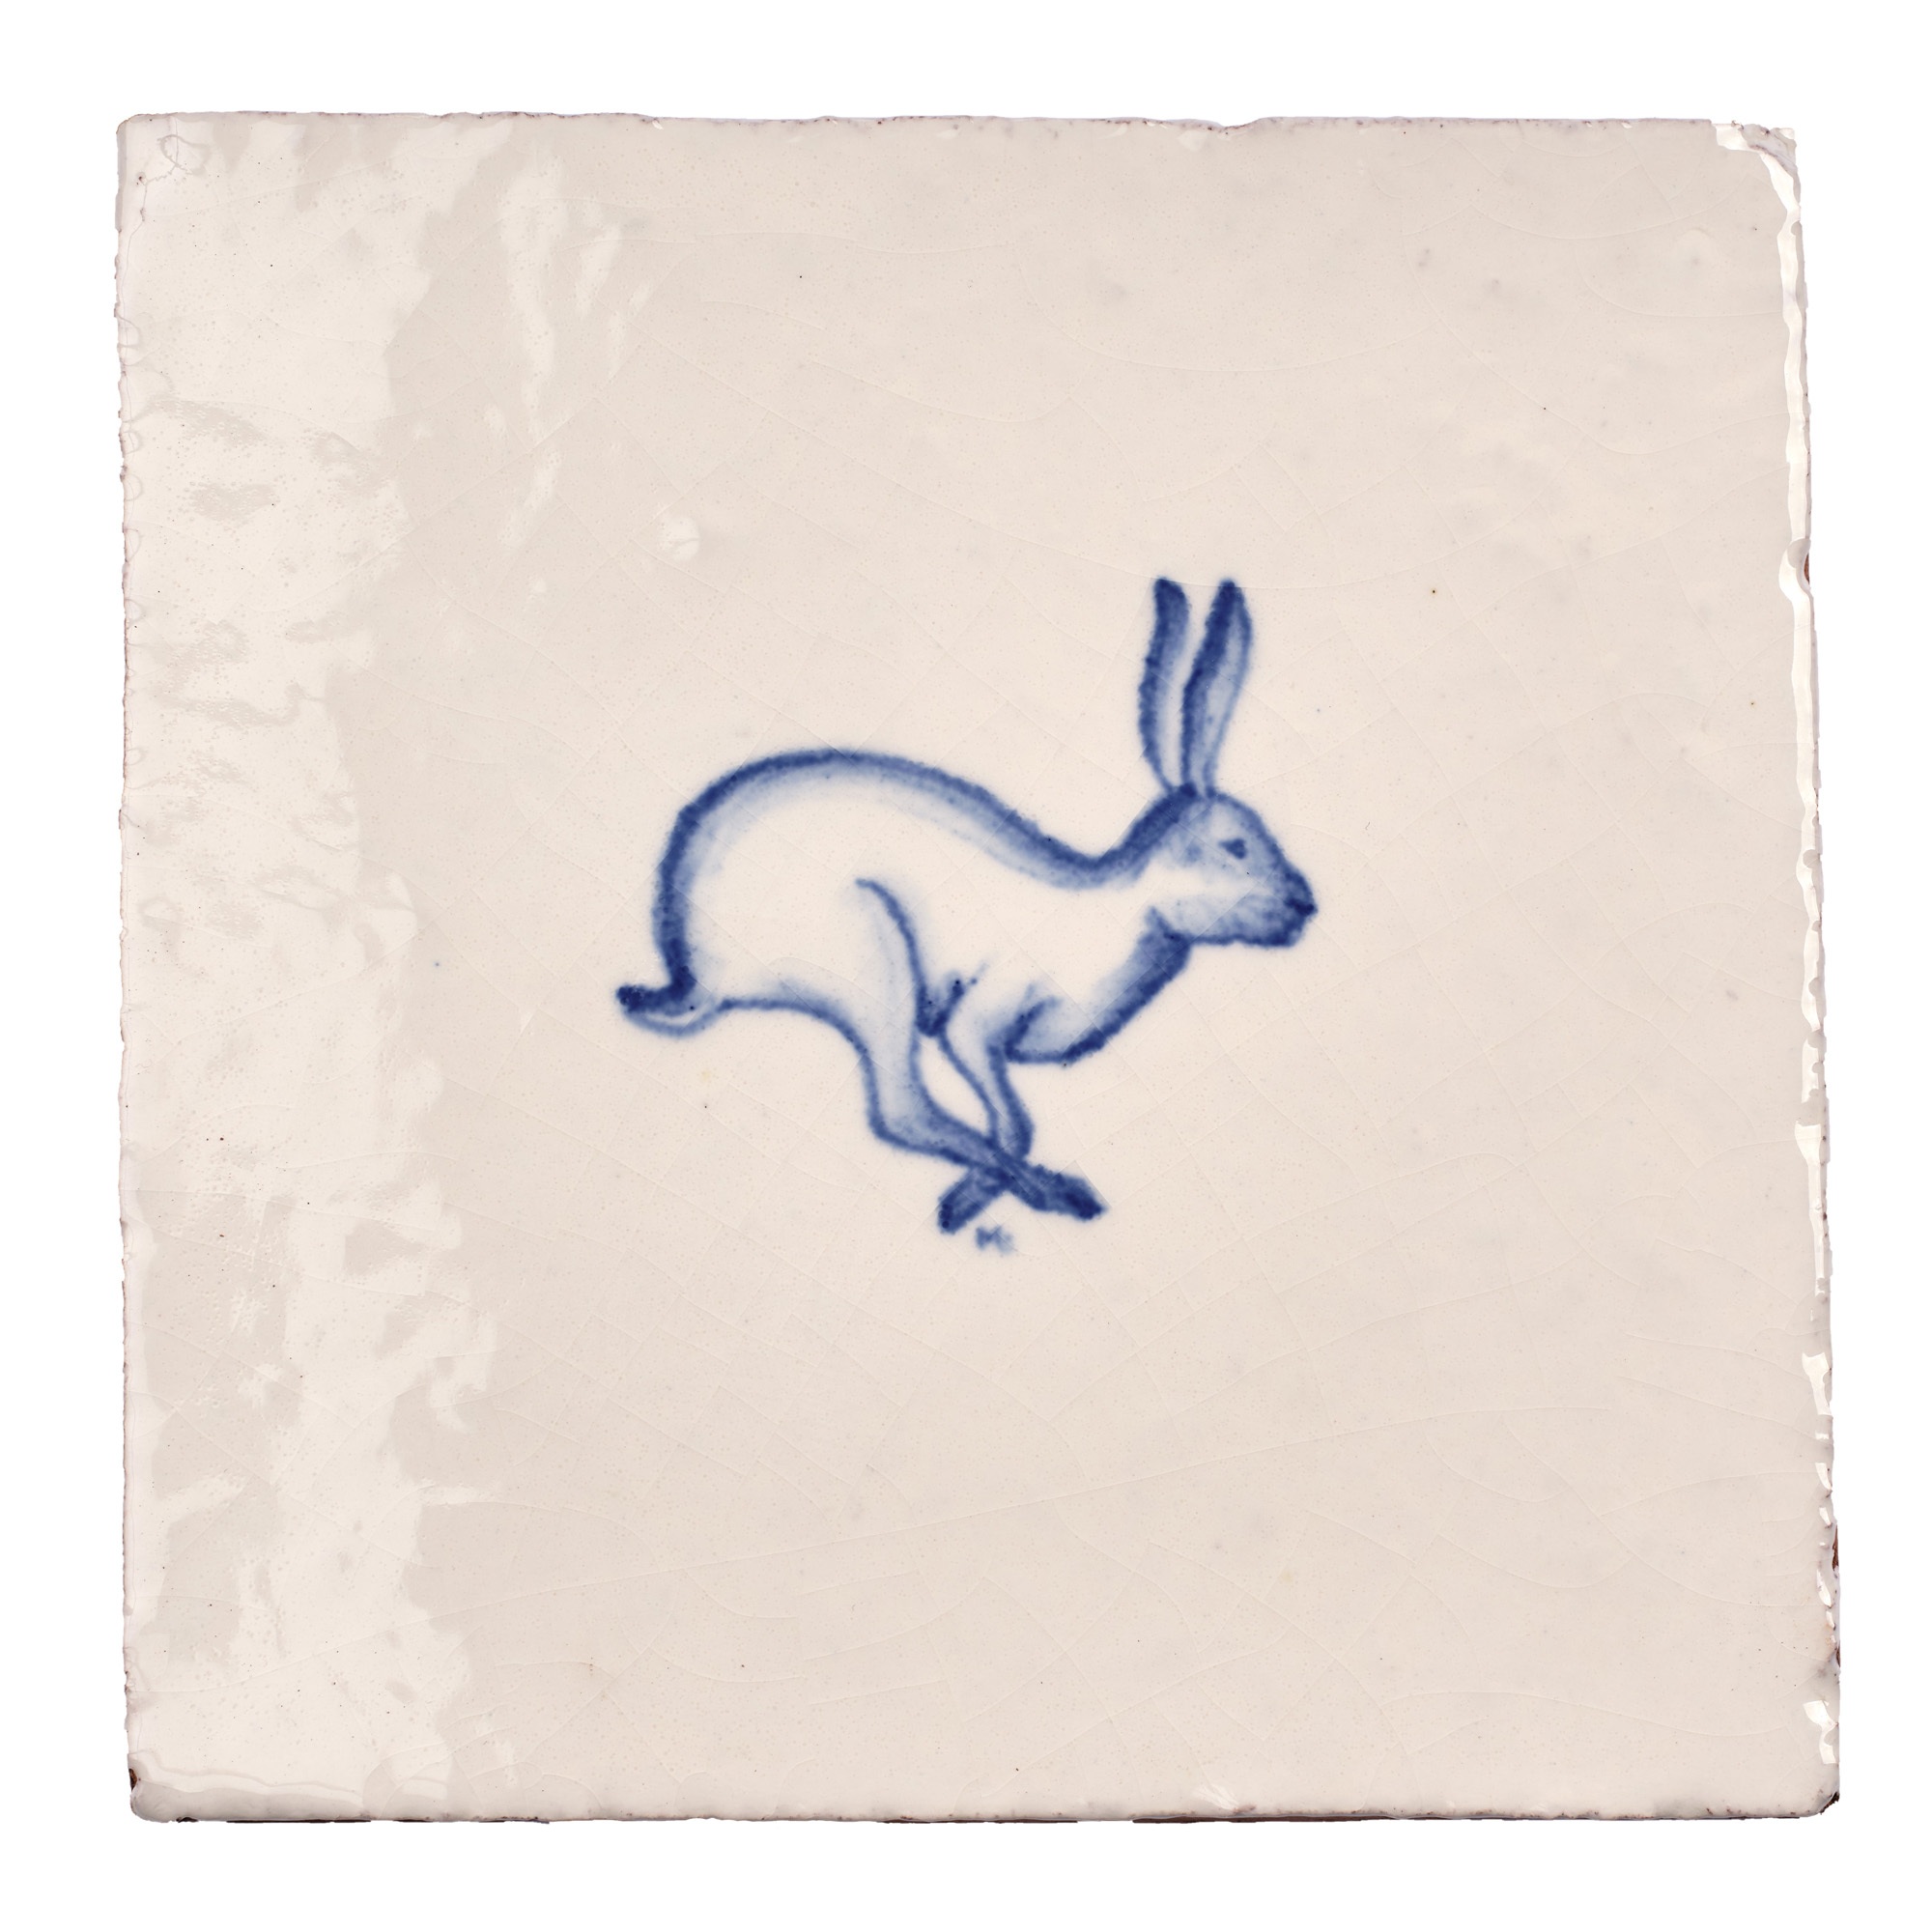 Wilding Hare Square, product variant image